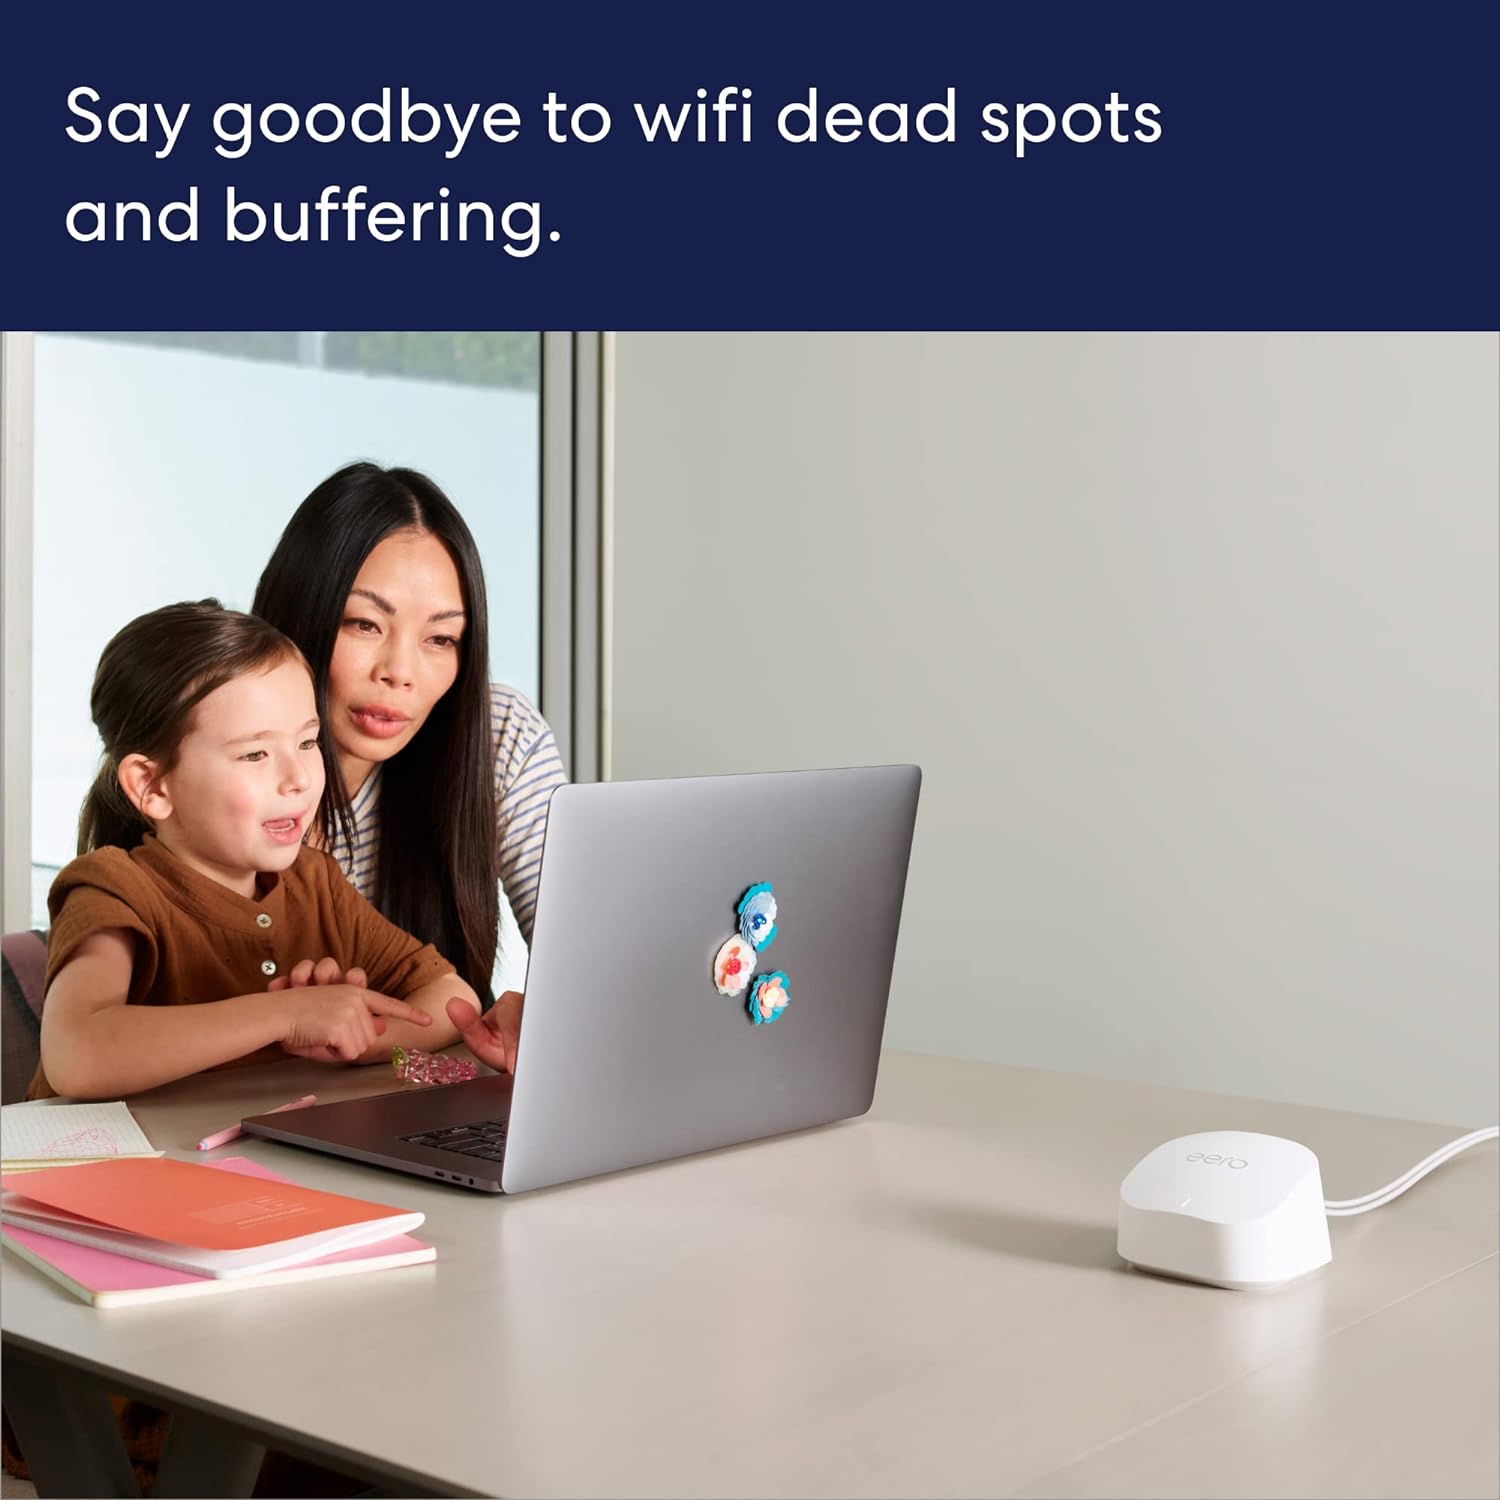 Amazon  6+ Mesh Wi-Fi Router | 1.0 Gbps Ethernet | Coverage up to 4,500 Sq. Ft. | Connect 75+ Devices | 3-Pack | 2022 Release